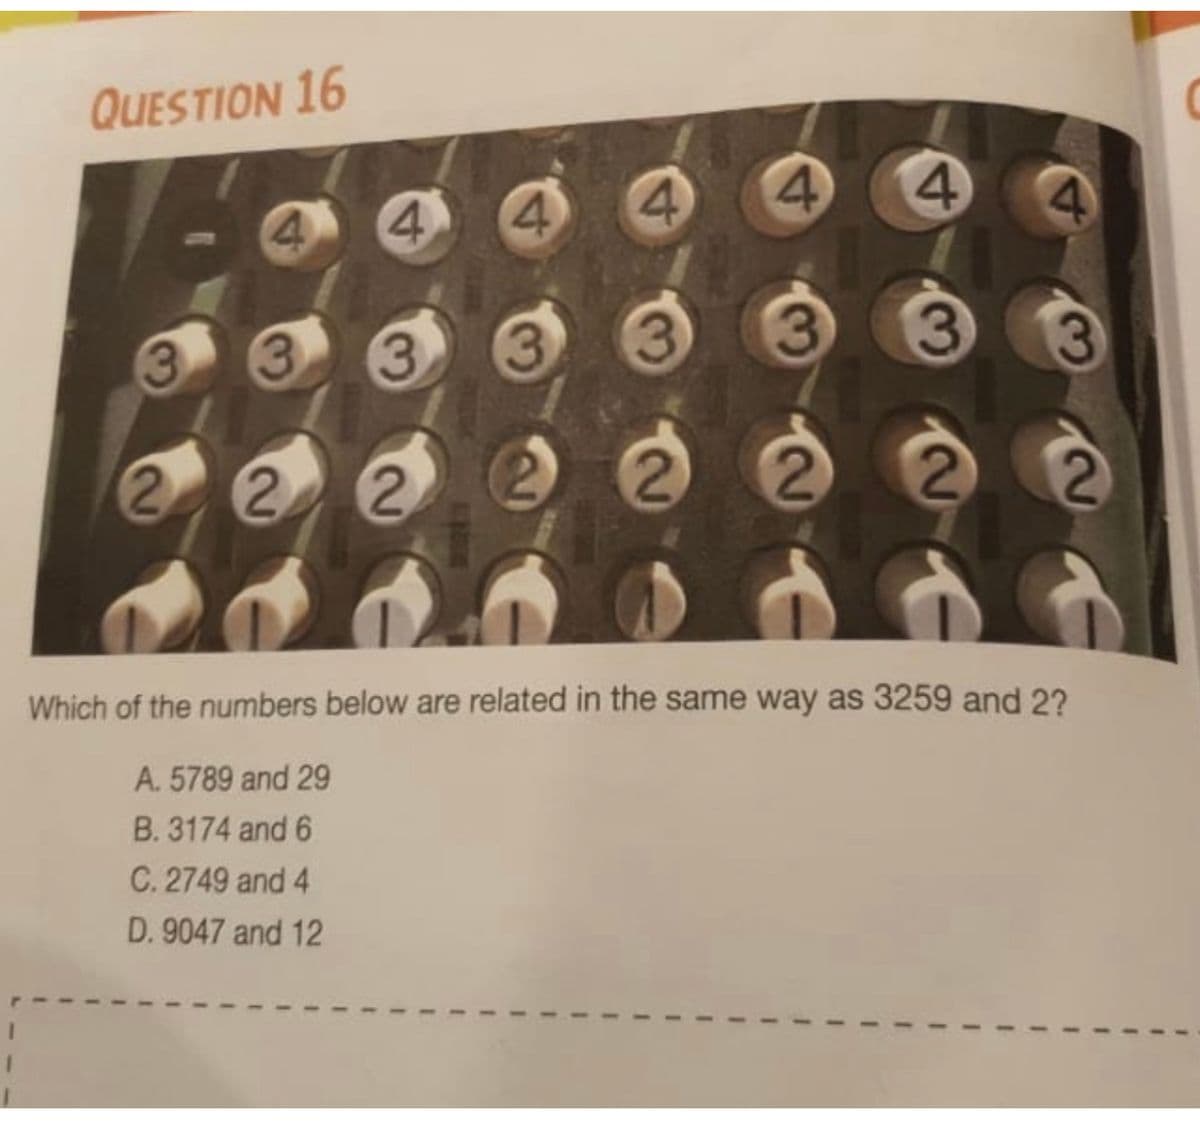 QUESTION 16
4 4
4.
4.
3.
3.
3.
3
2
Which of the numbers below are related in the same way as 3259 and 2?
A. 5789 and 29
B. 3174 and 6
C. 2749 and 4
D. 9047 and 12
